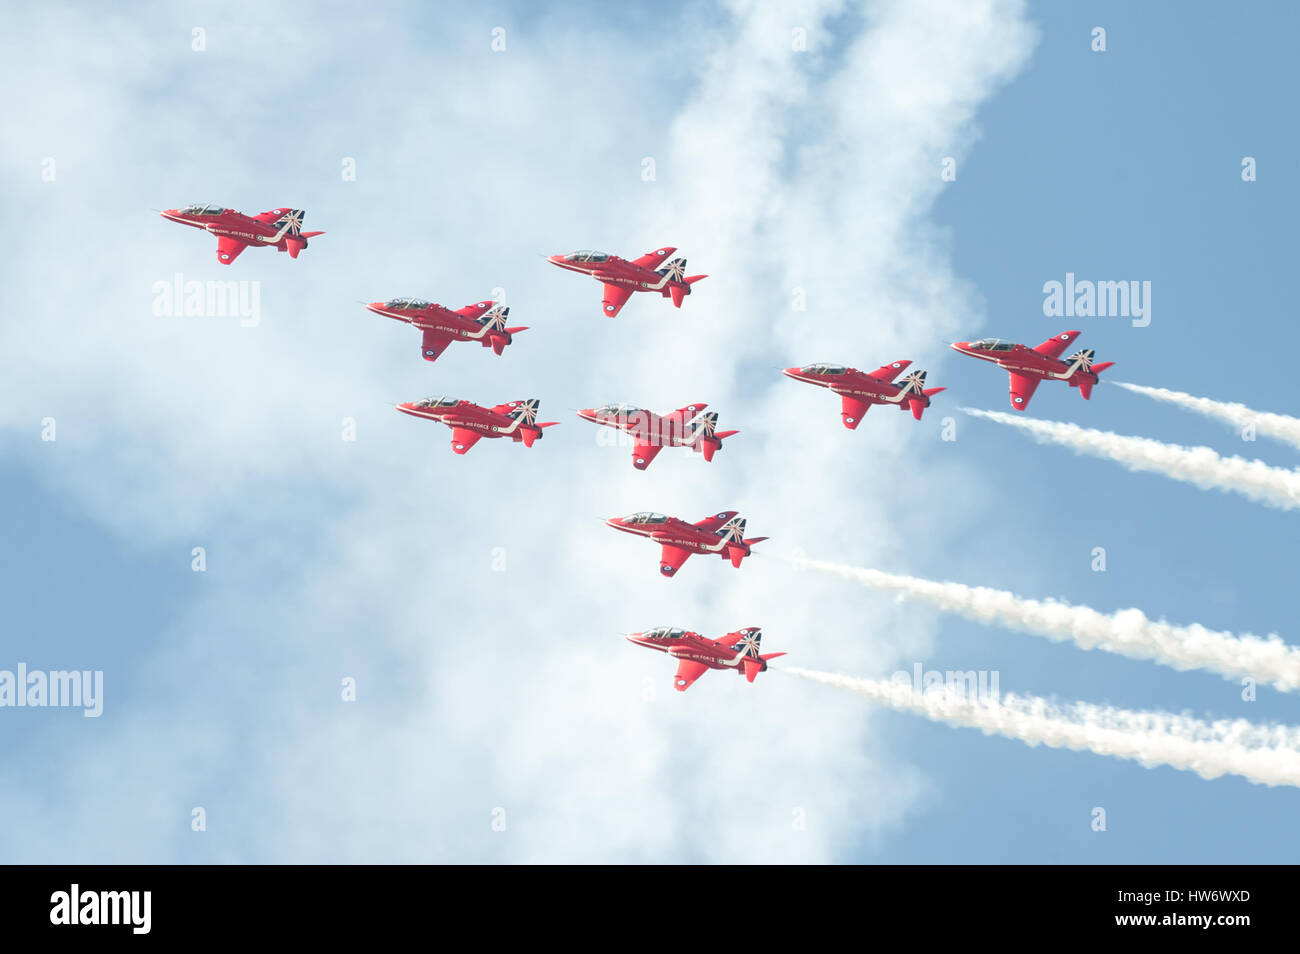 The Red Arrows formation aerobatic display team leaving smoke trails in the sky over Farnborough, UK Stock Photo